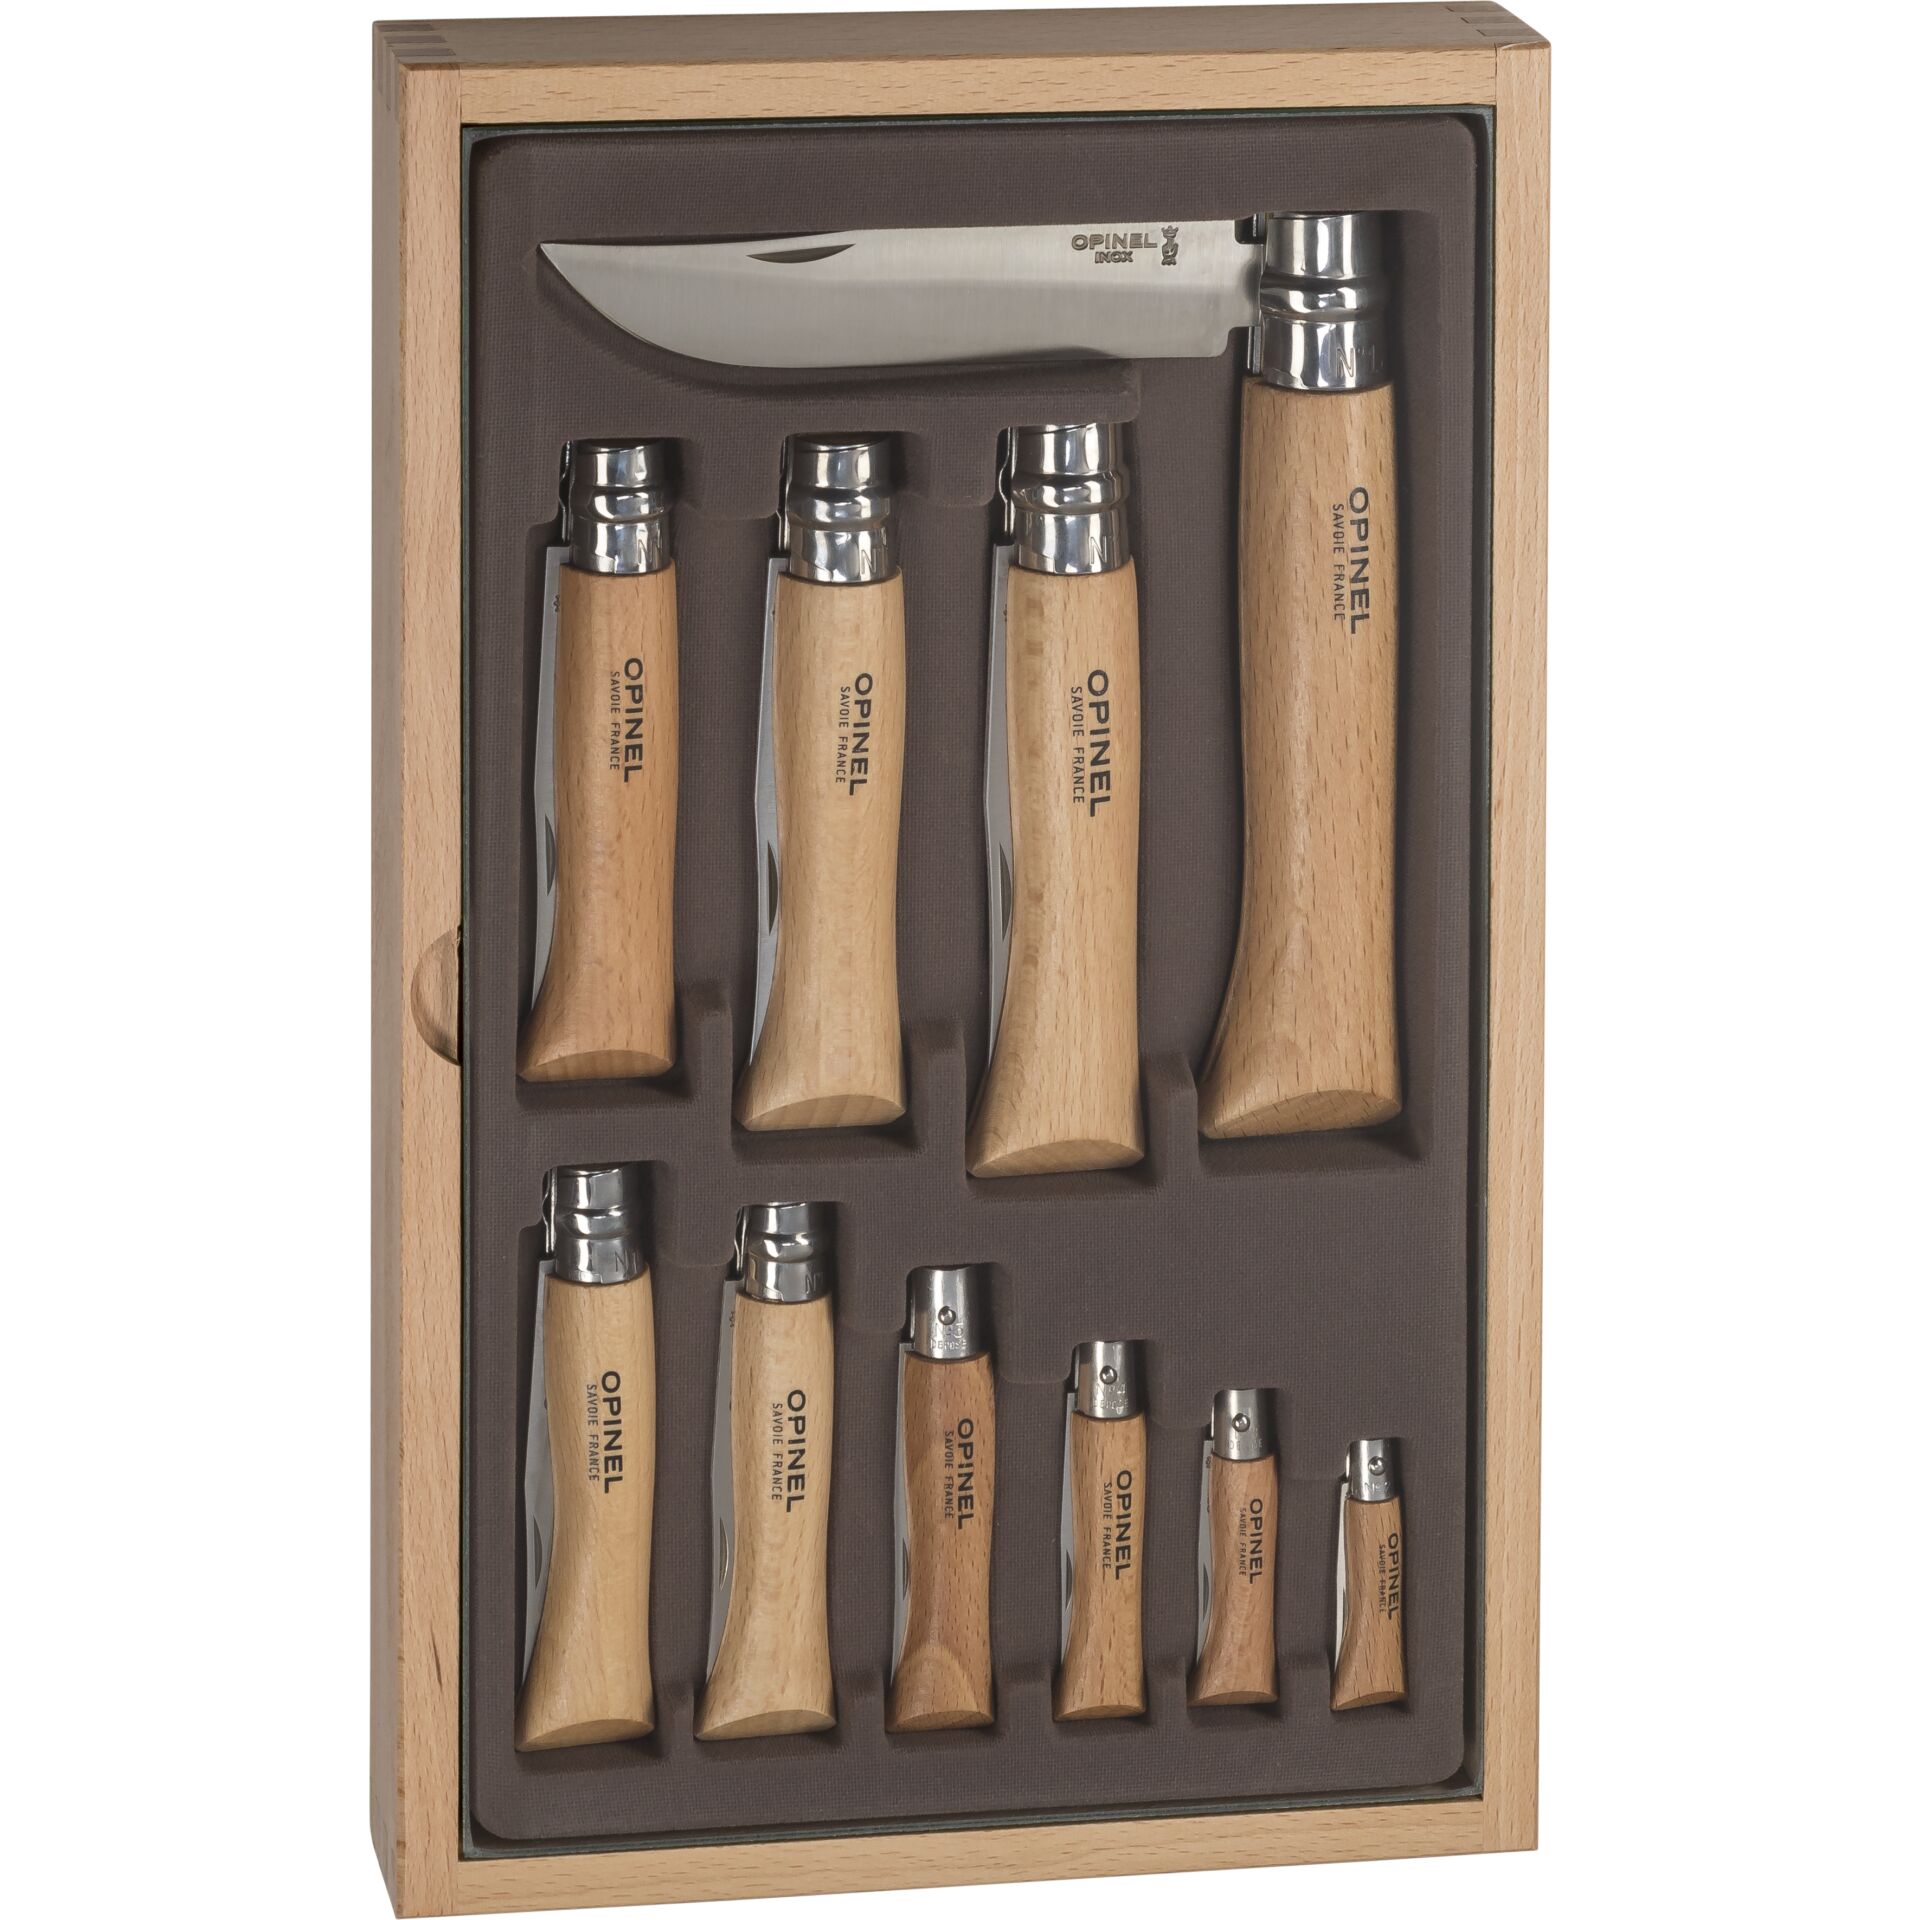 Opinel cassetta in legno 10 coltelli Opinel - Opinel - Autoscatto Store